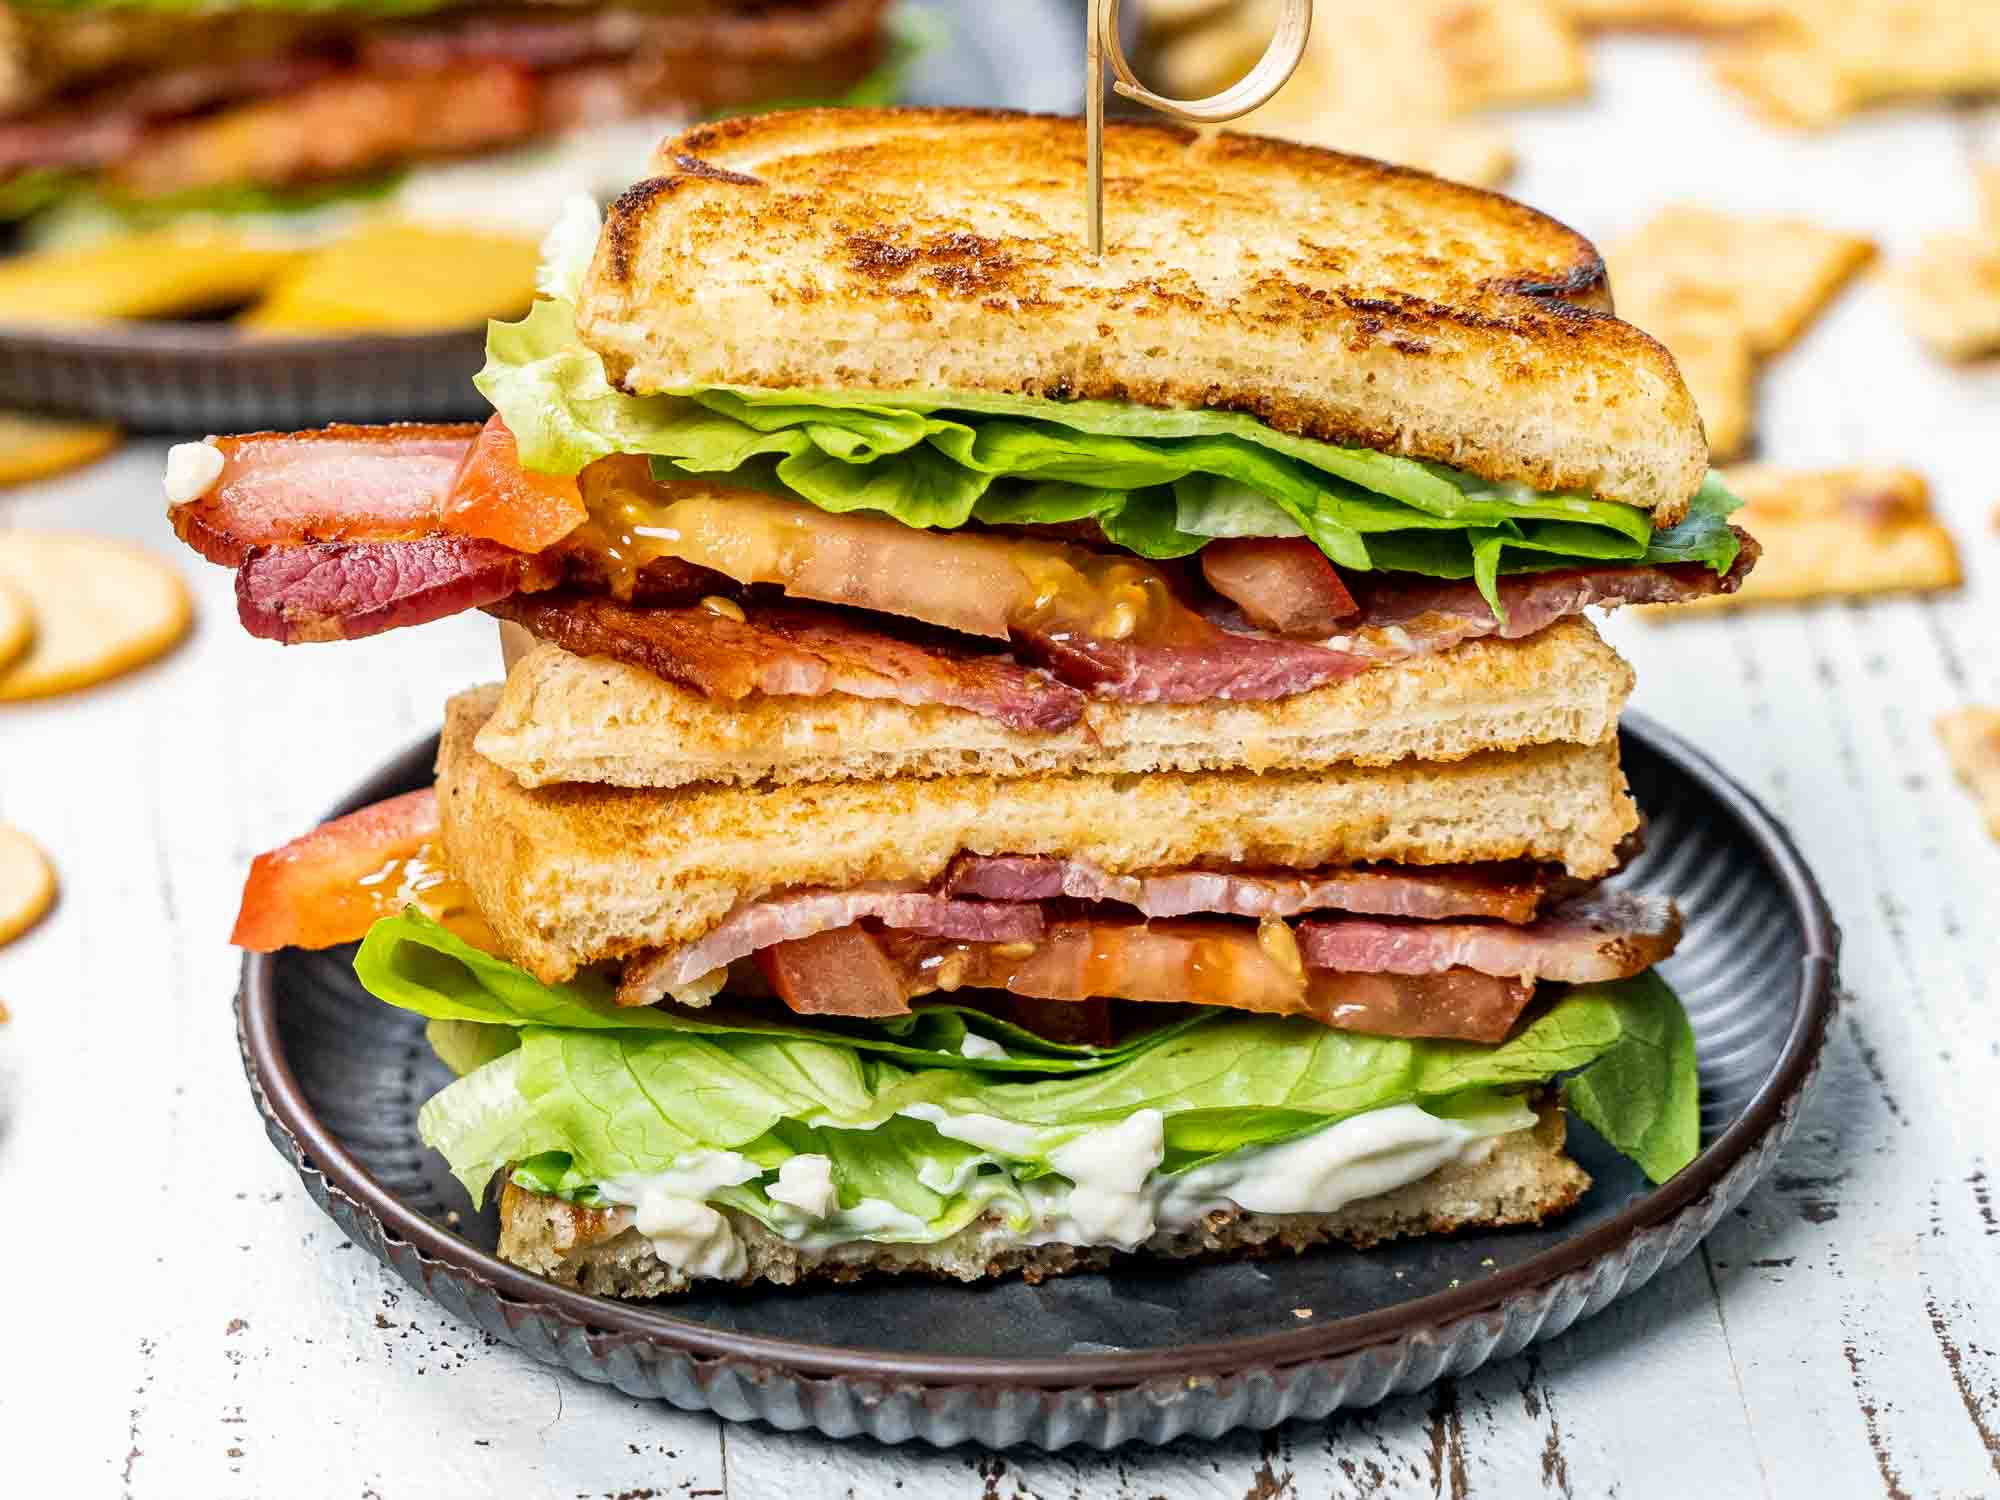 a BLT sandwich cut in half and stacked on a plate.